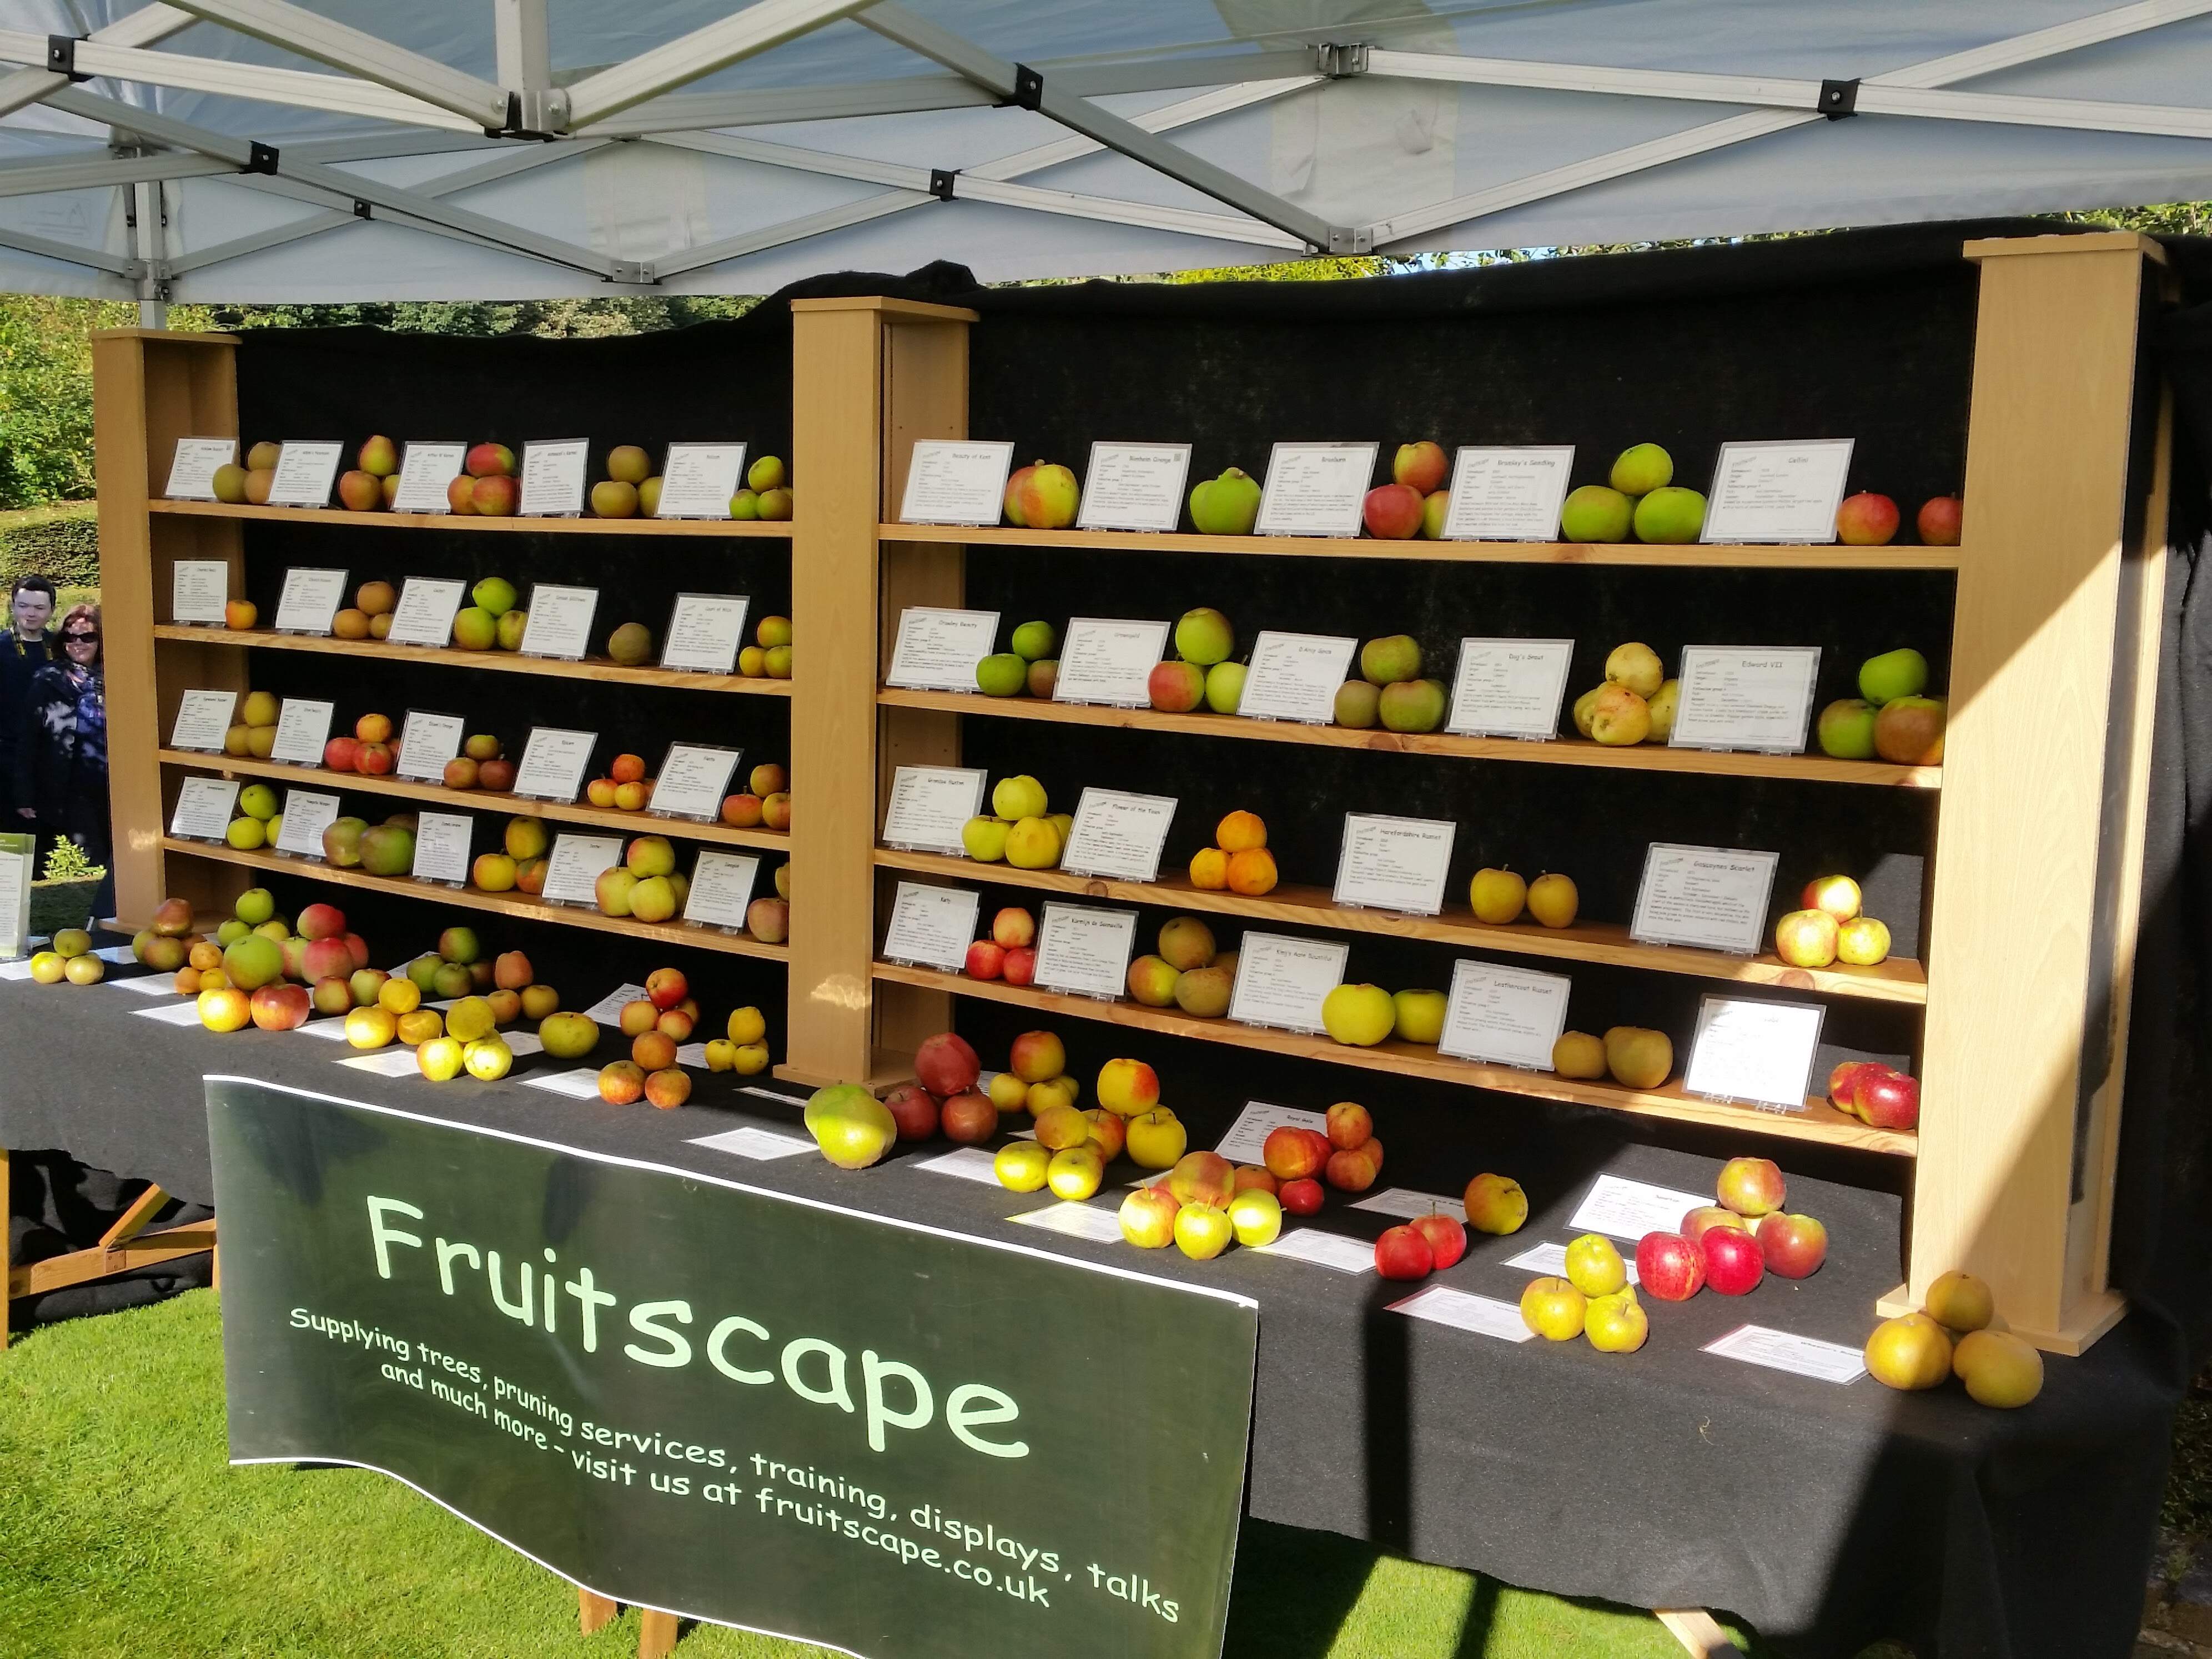 Display of Fruitscape grown apples at Franklin Gardens, Braunstone, Leicester